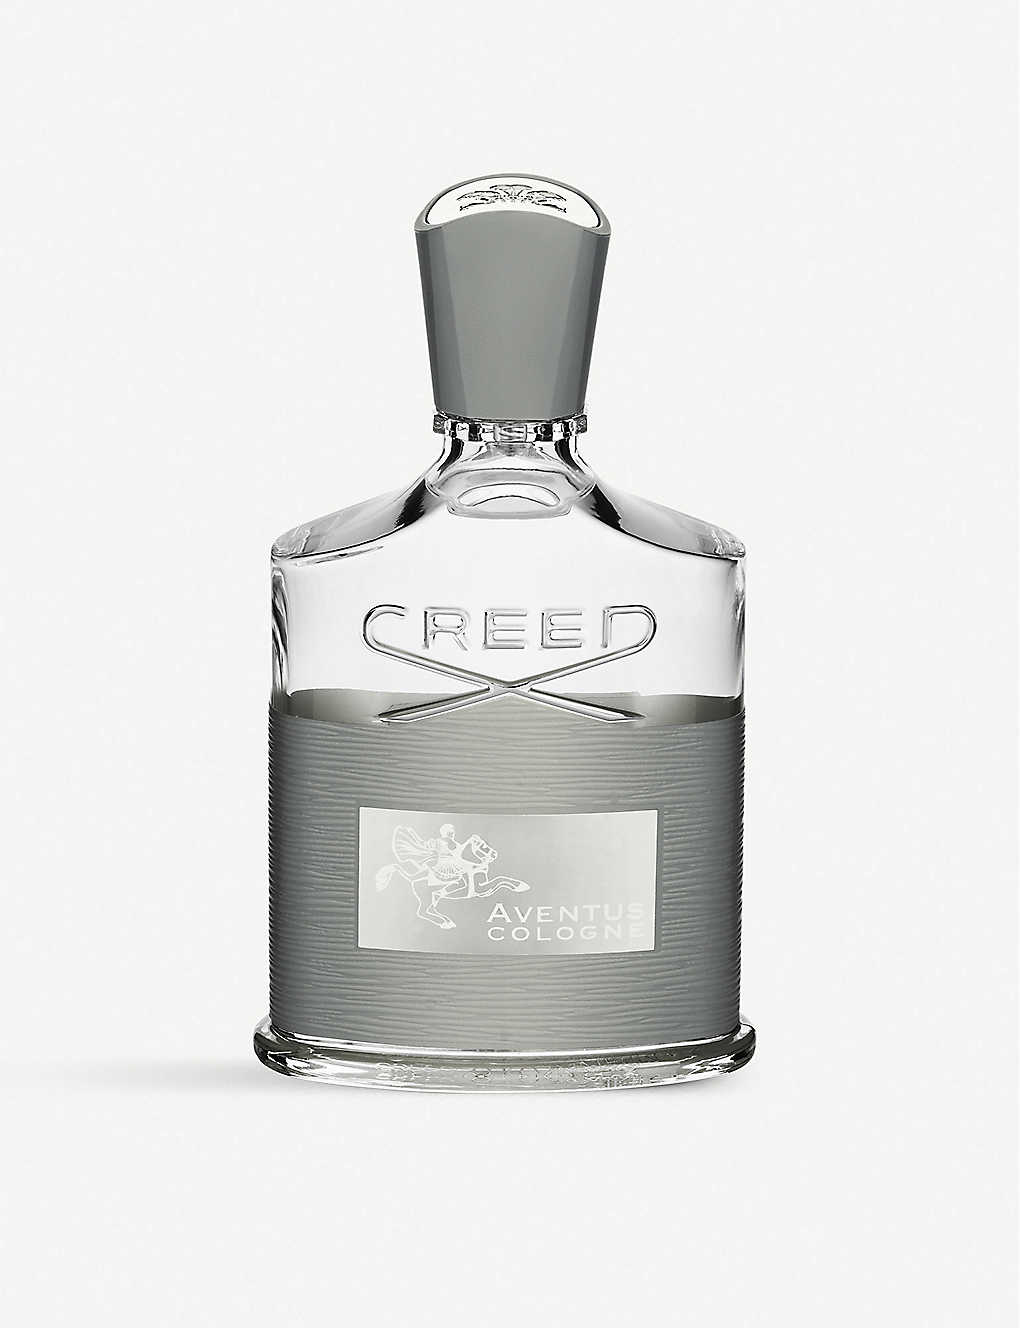 Creed Testeur Aventus Cologne 100ml